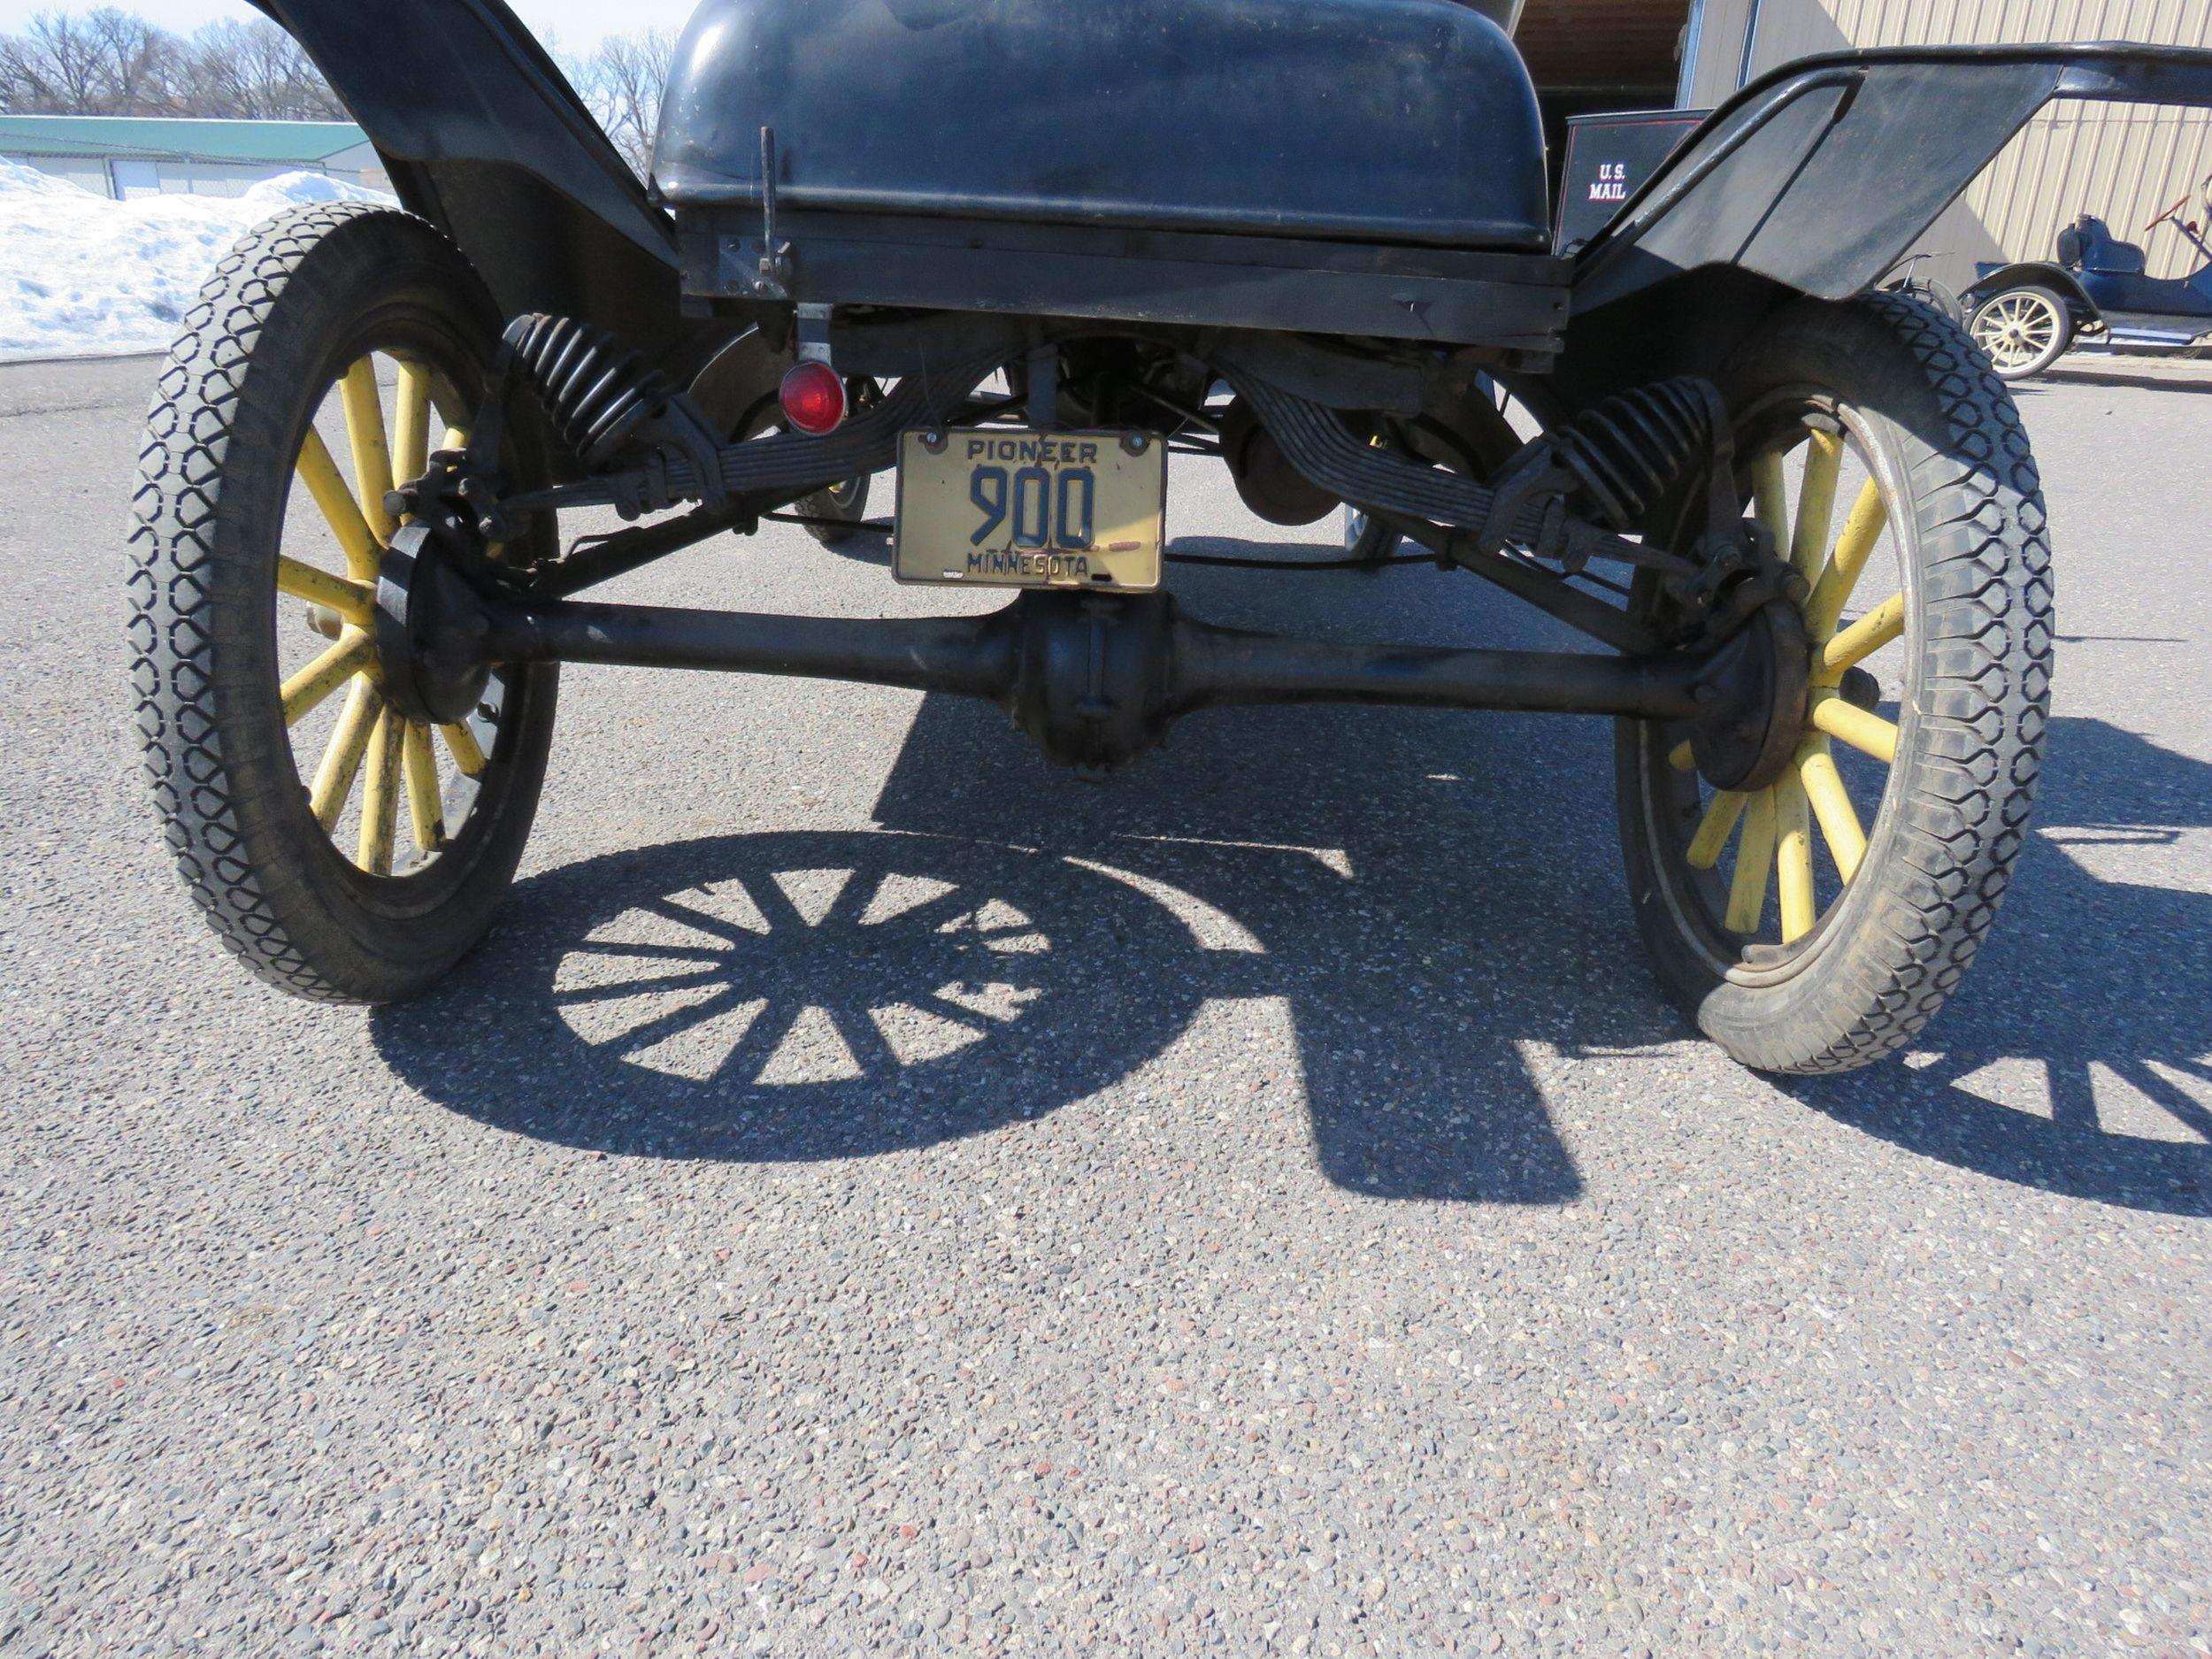 1912 Ford Model T Runabout